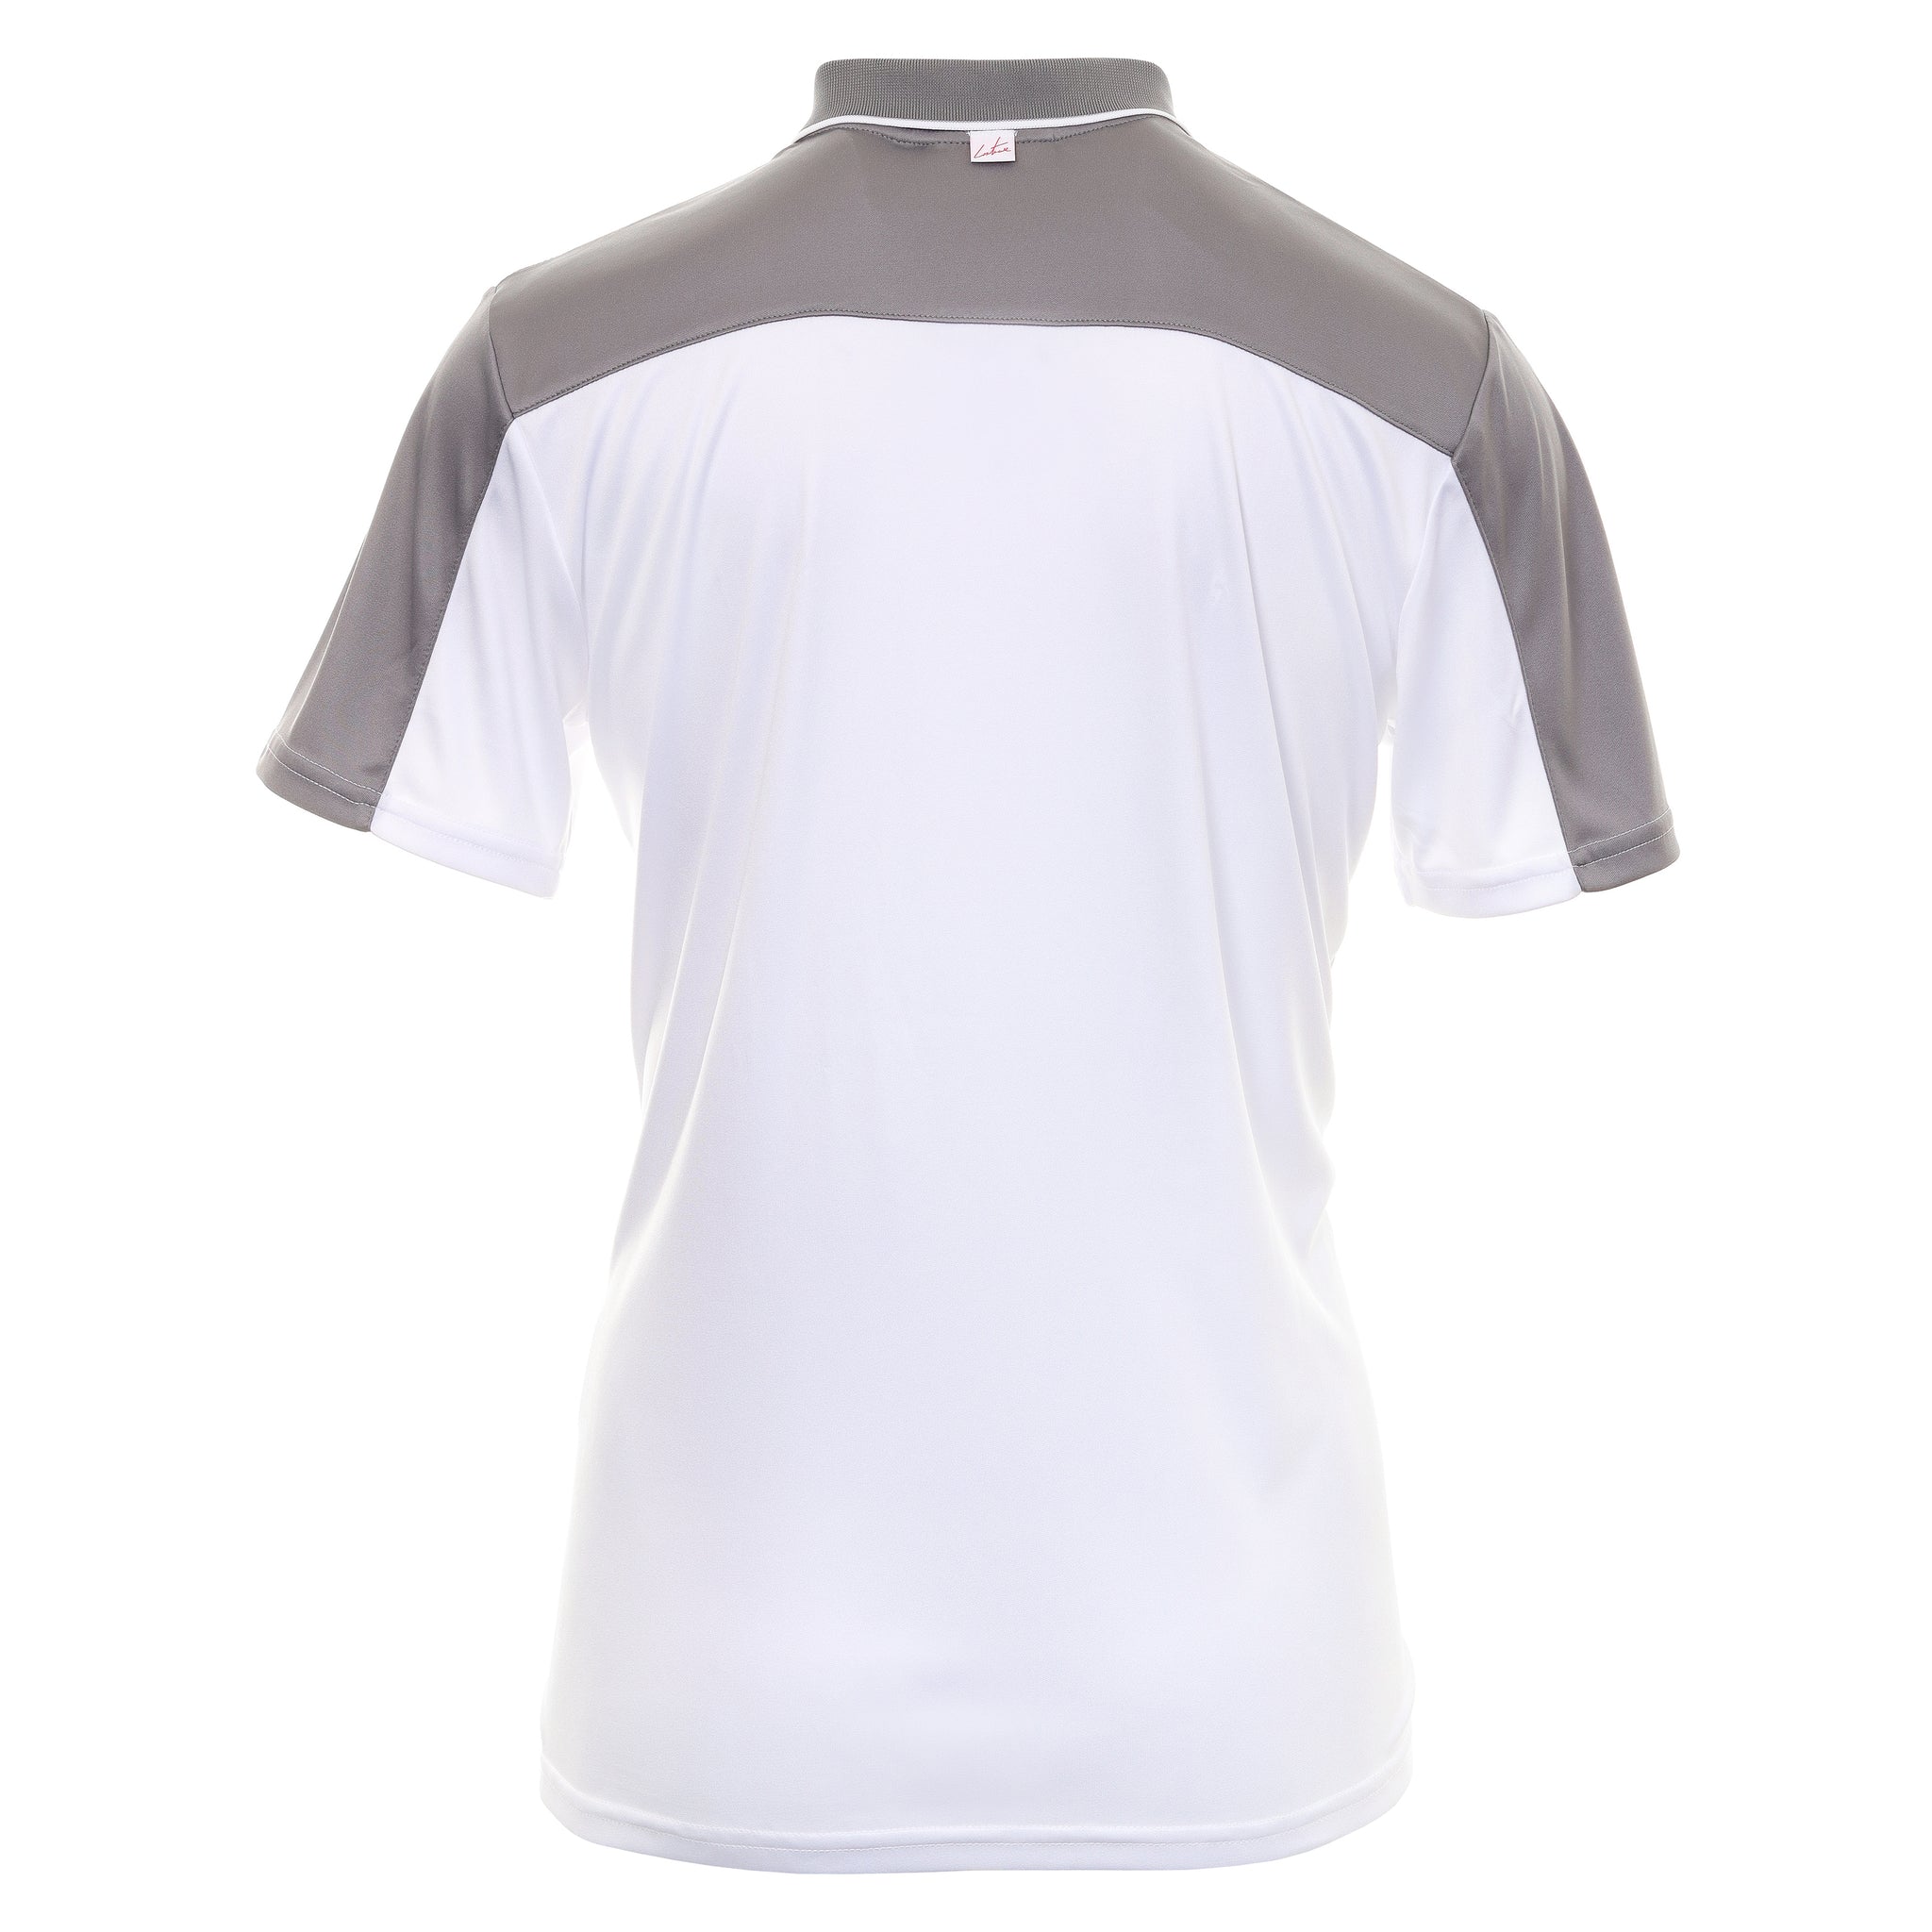 couture-club-golf-panelled-1-4-shirt-tccm1977-grey-white